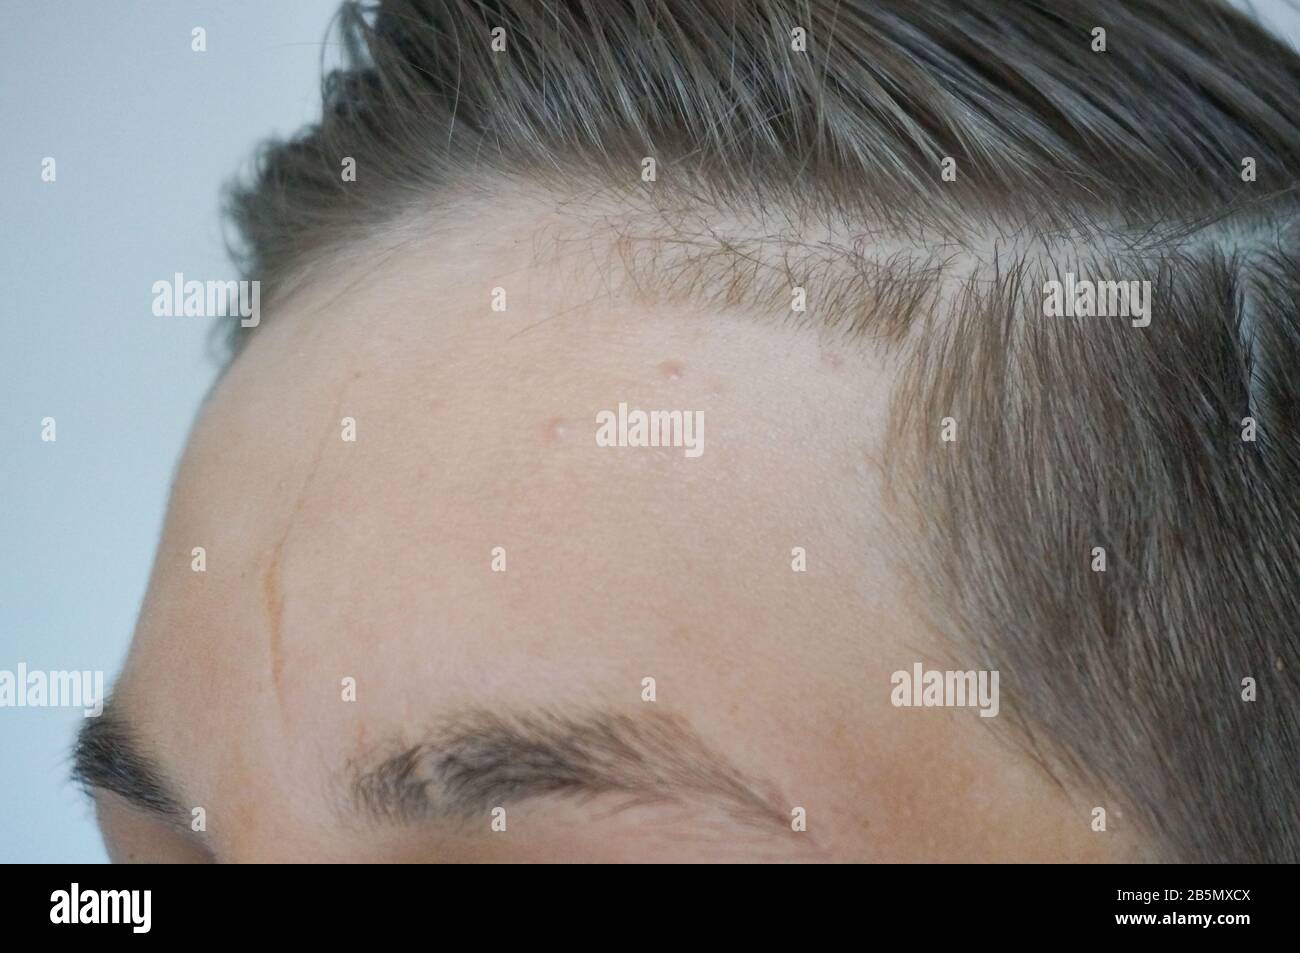 Teenager's forehead close up, young skin imperfection scar and acne Stock Photo